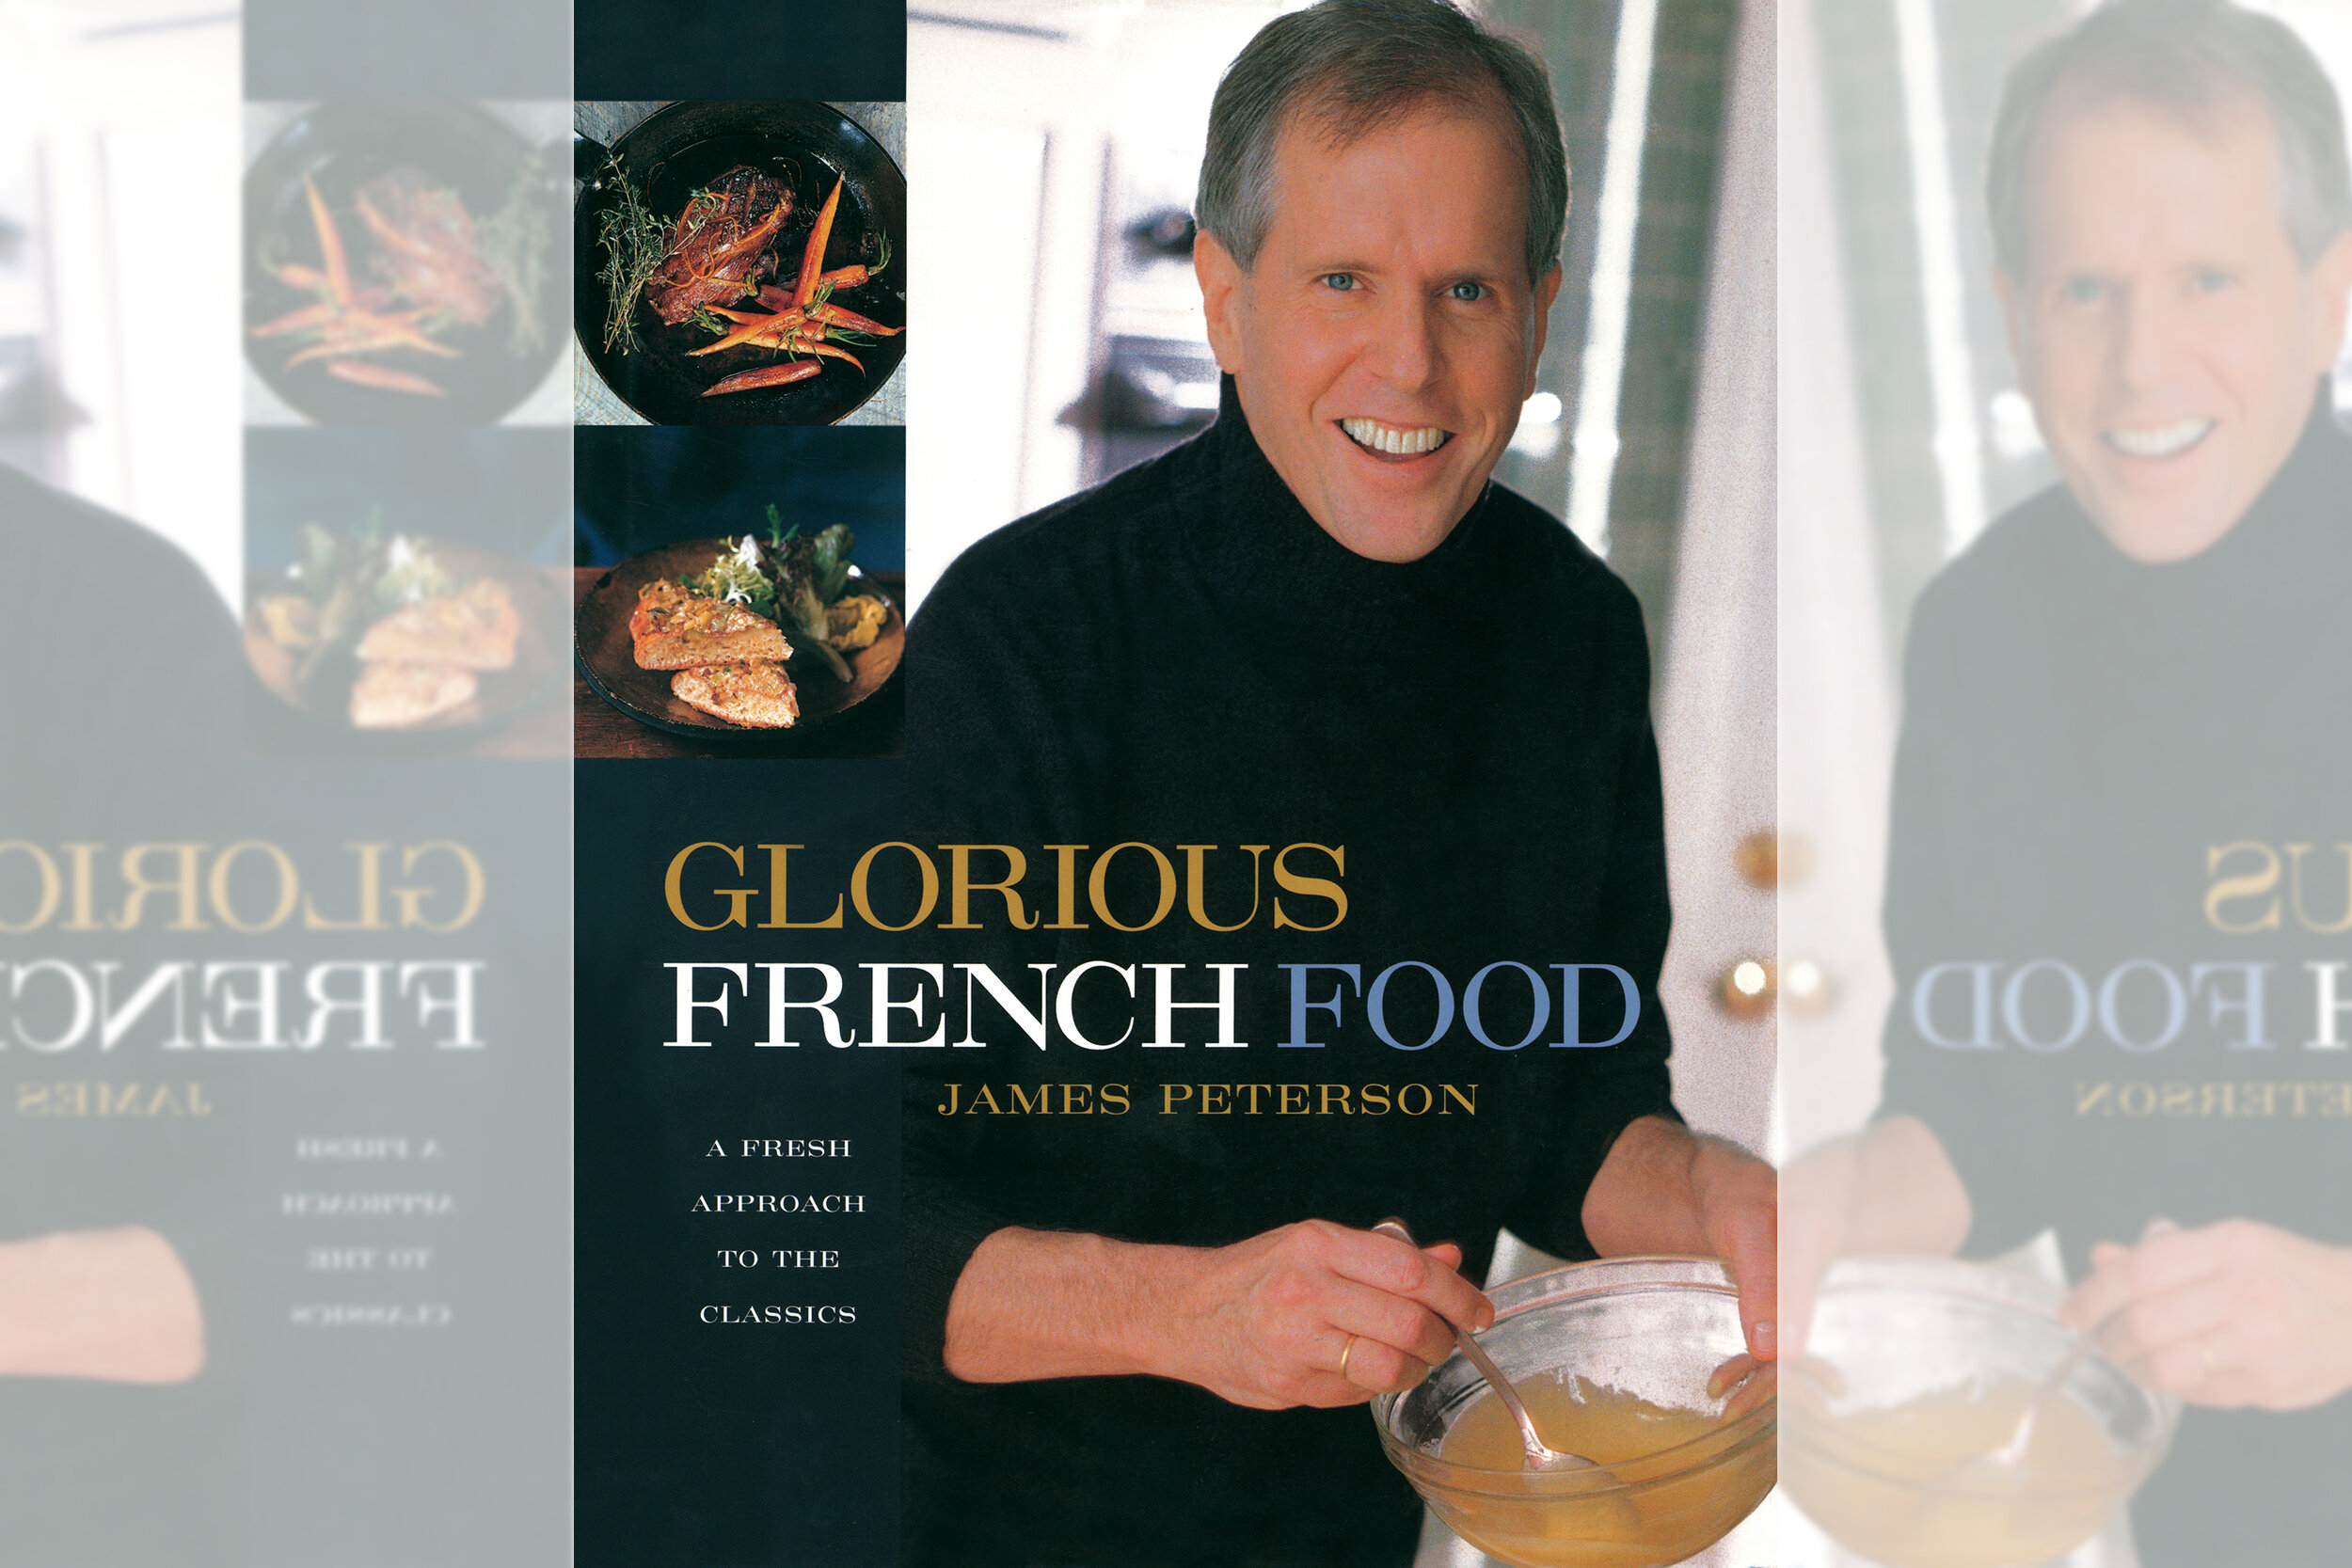 Behind the Cookbook: James Peterson on Glorious French Food